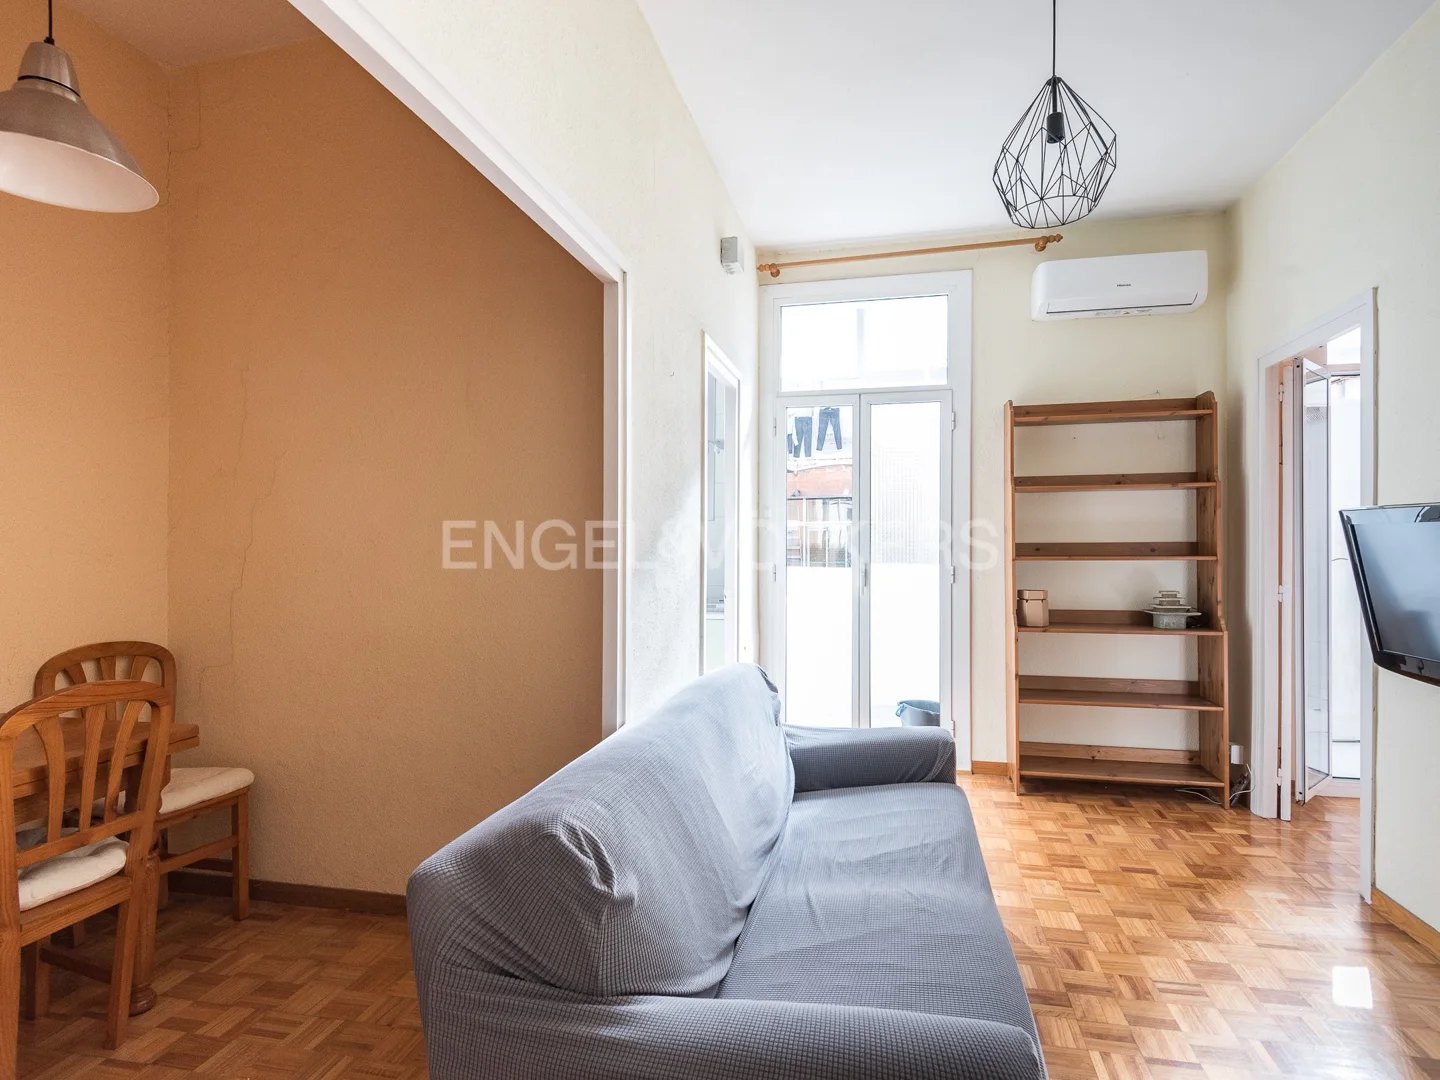 COZY AND VERY BRIGHT APARTMENT IN THE HEART OF POBLE SEC